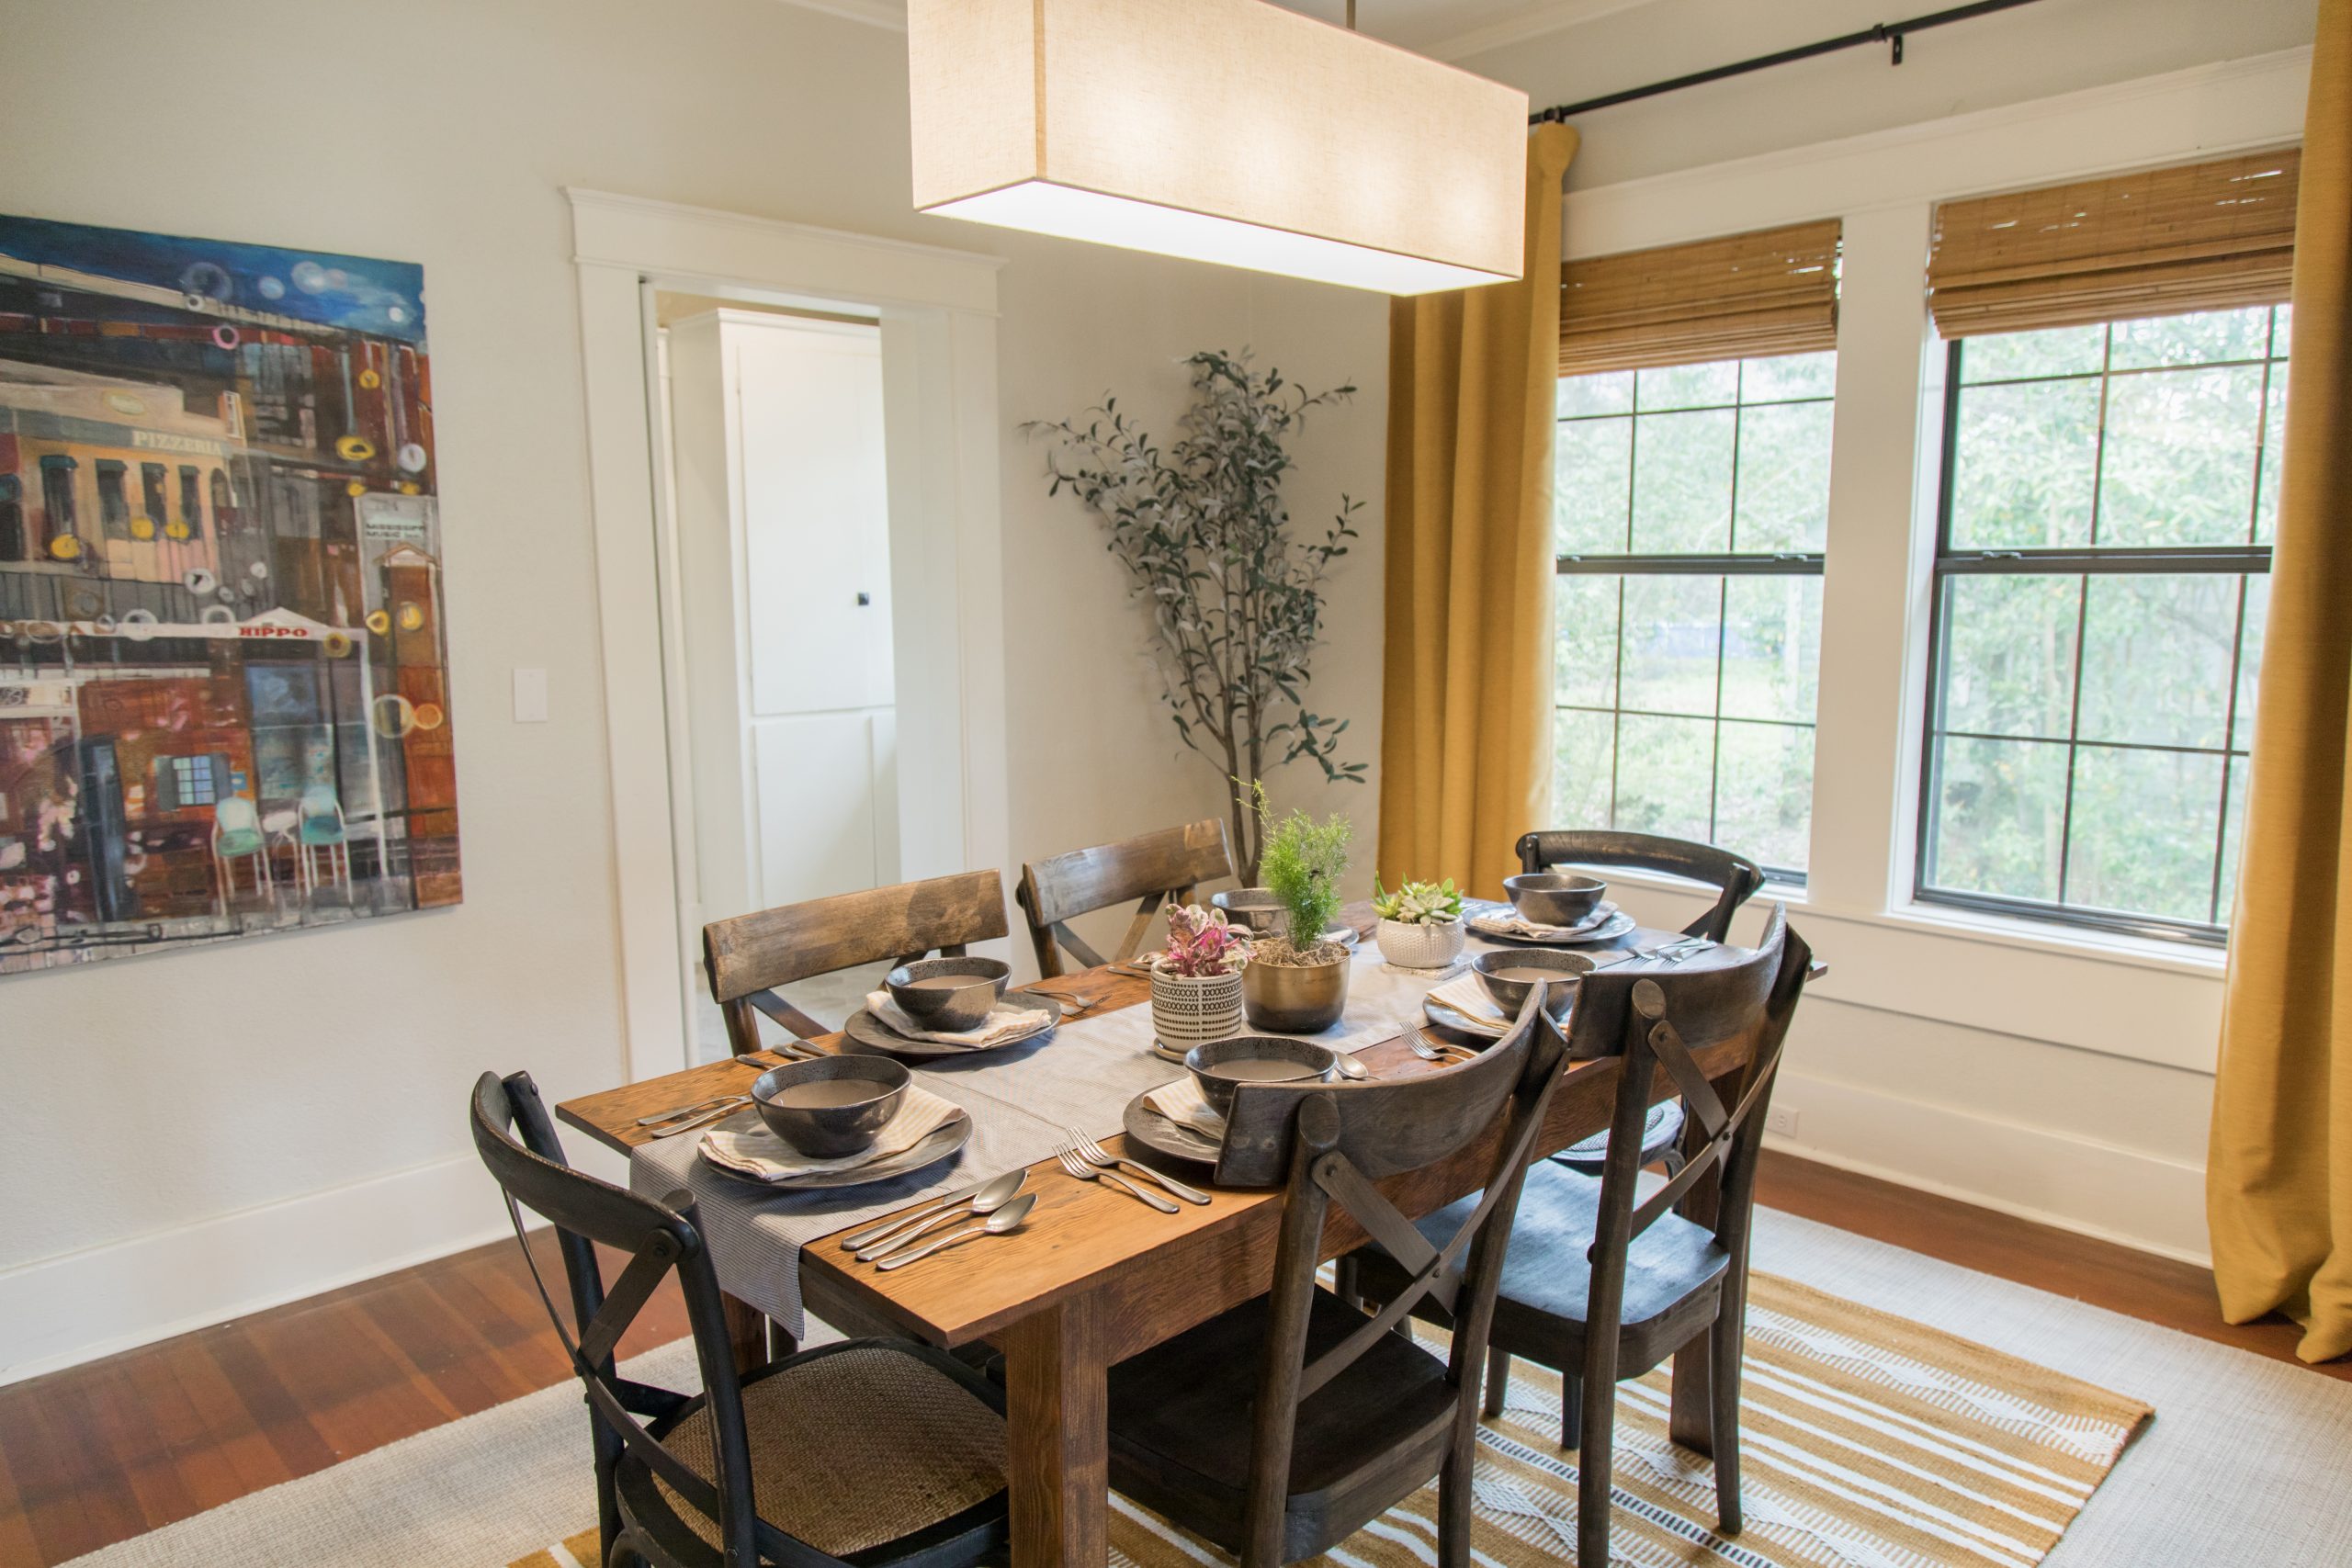 Dining room with wood features and mustard yellow accents